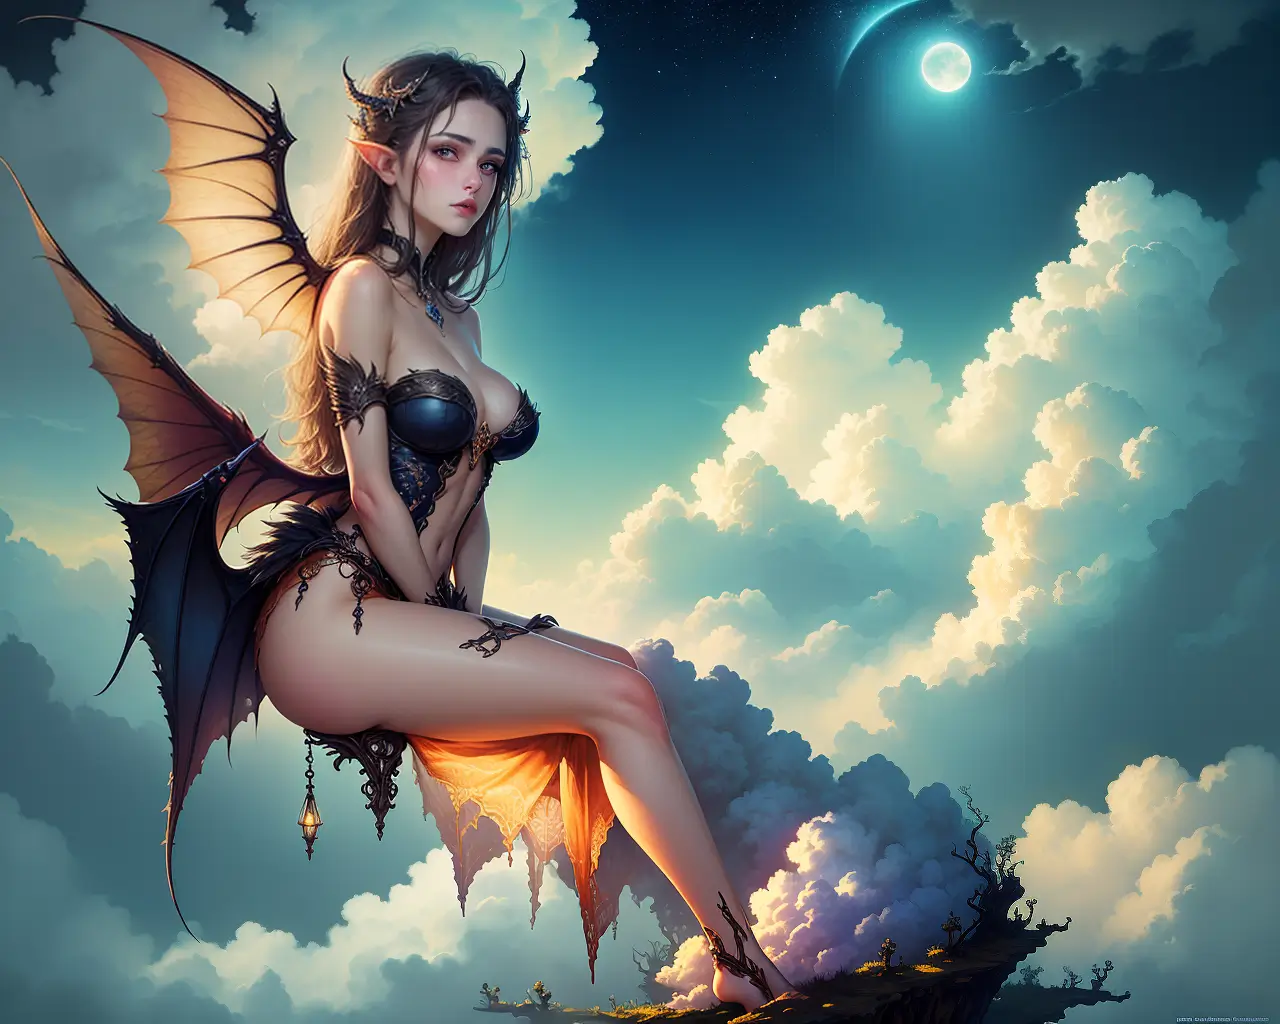 Fantasy girl with bat wings sitting on clouds